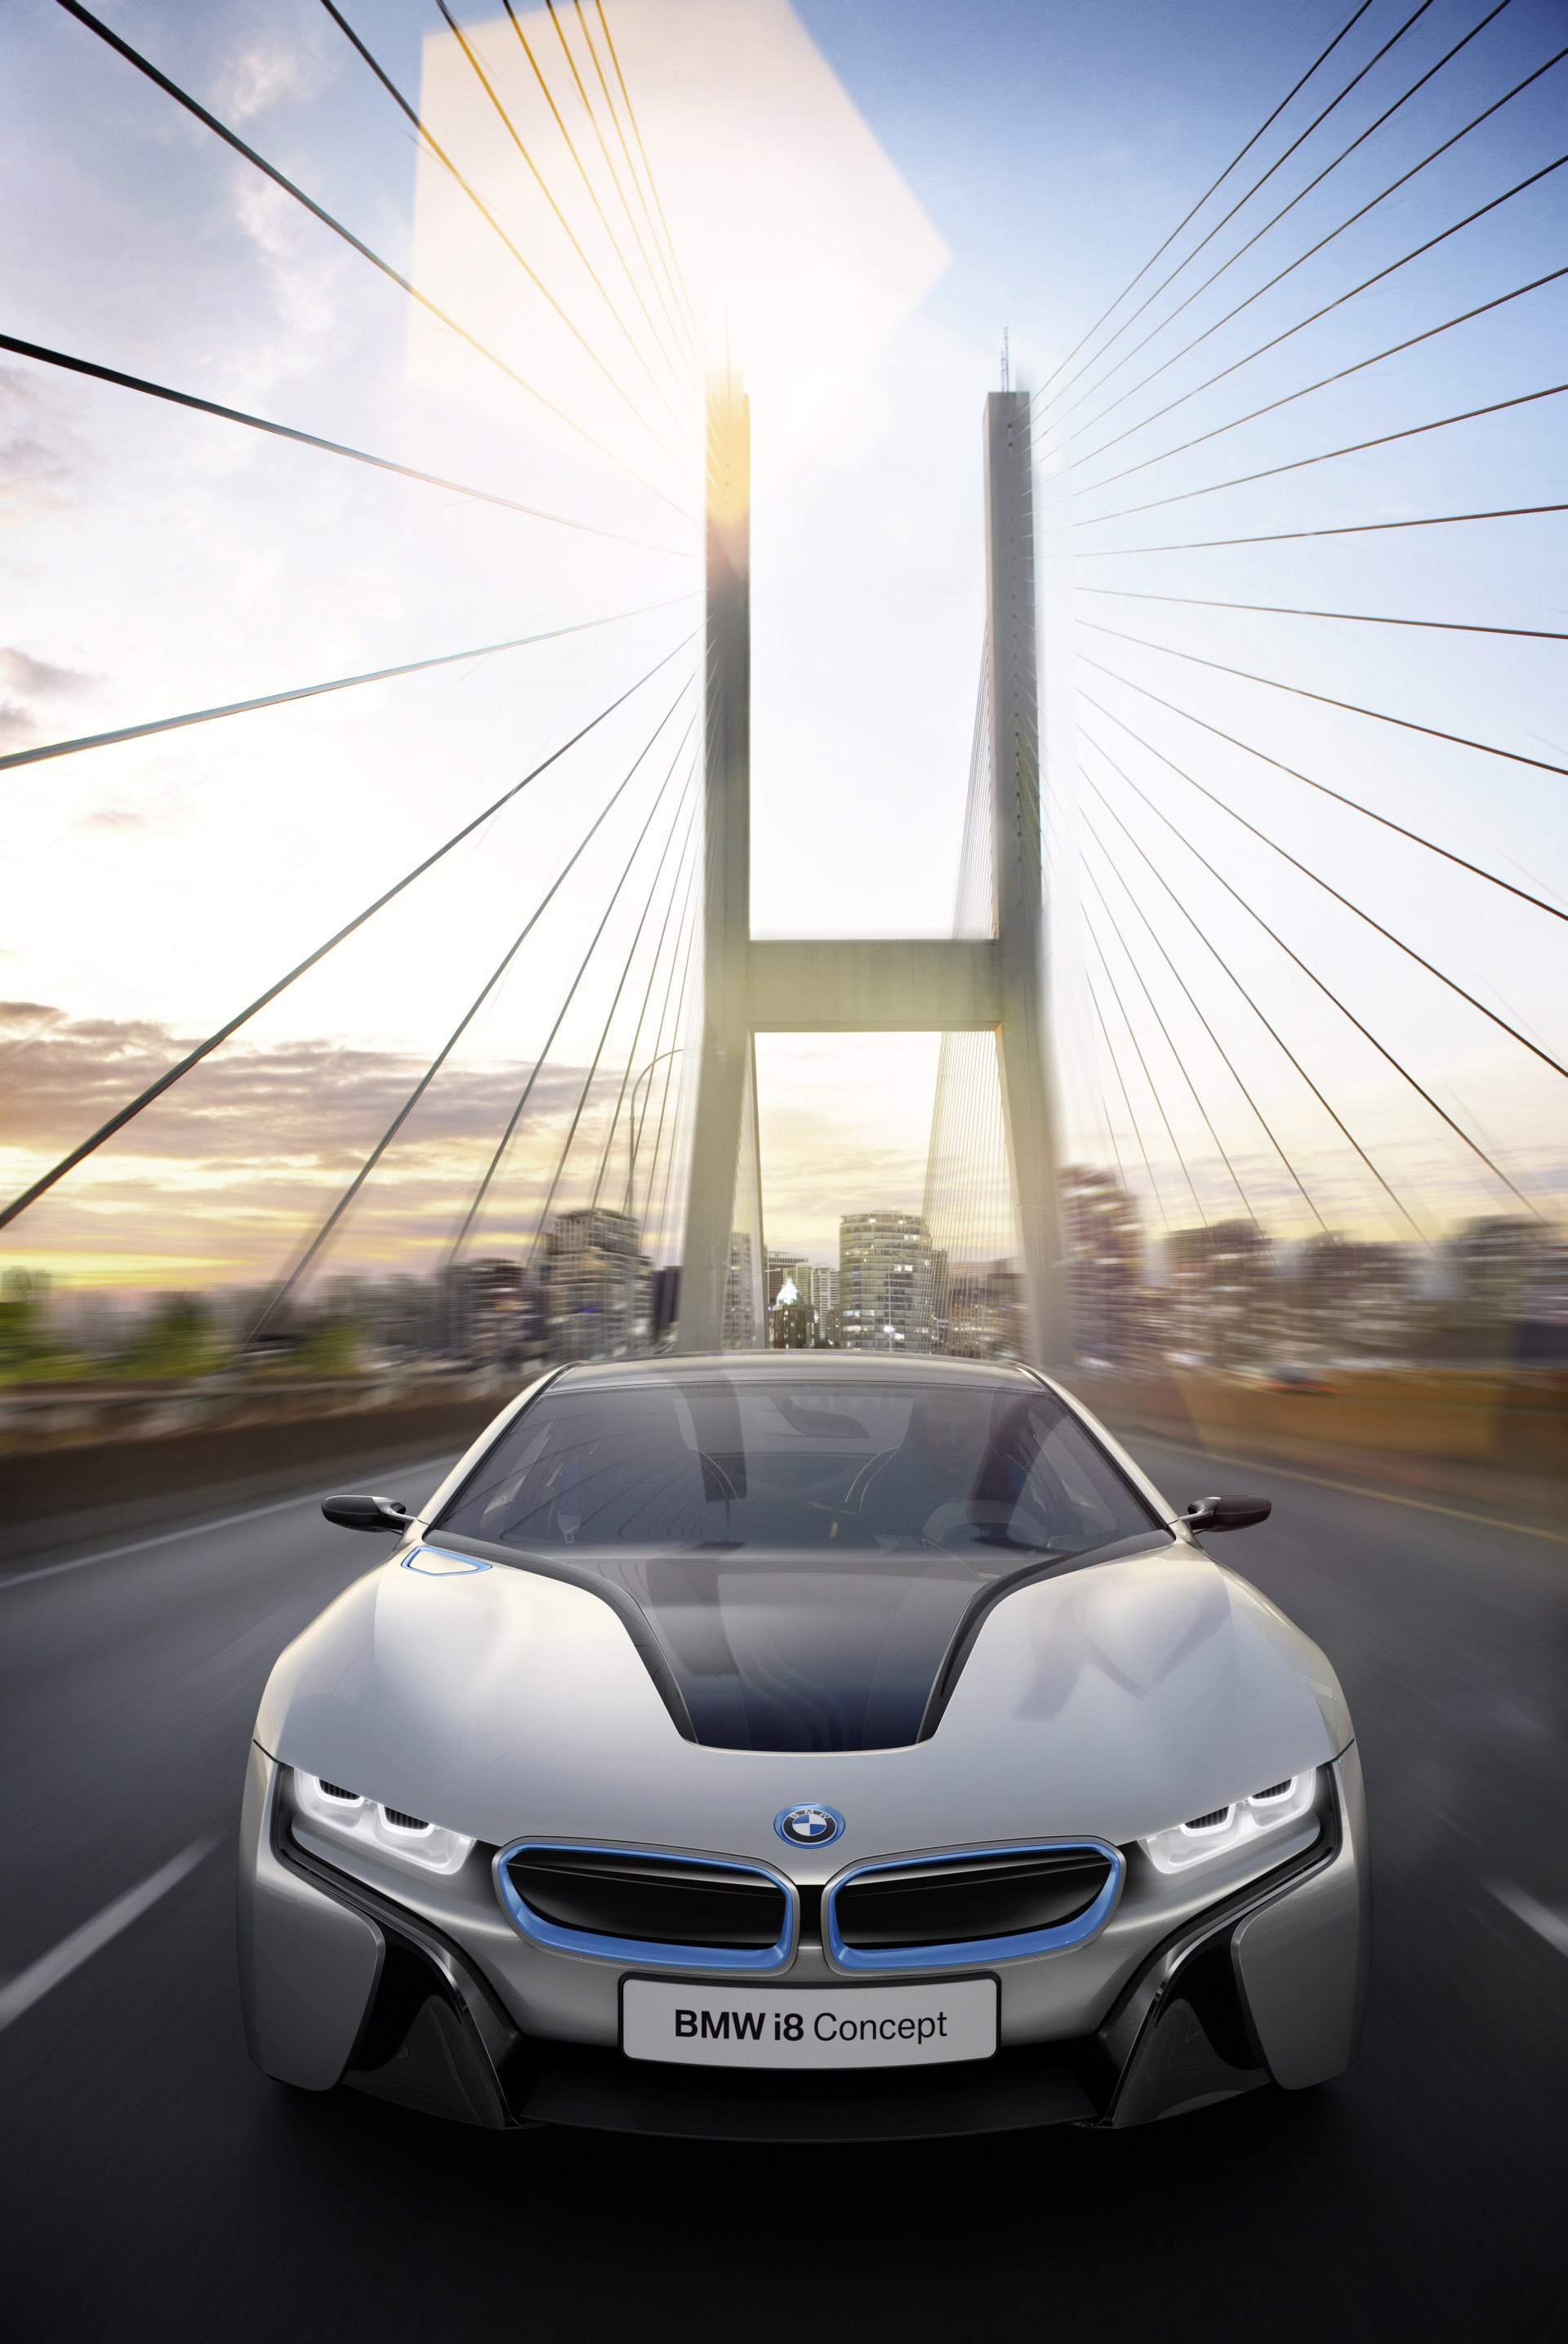 BMW i8 Concept 2011, High-resolution picture, Futuristic car design, Unprecedented innovation, Visionary engineering, 1920x2870 HD Phone